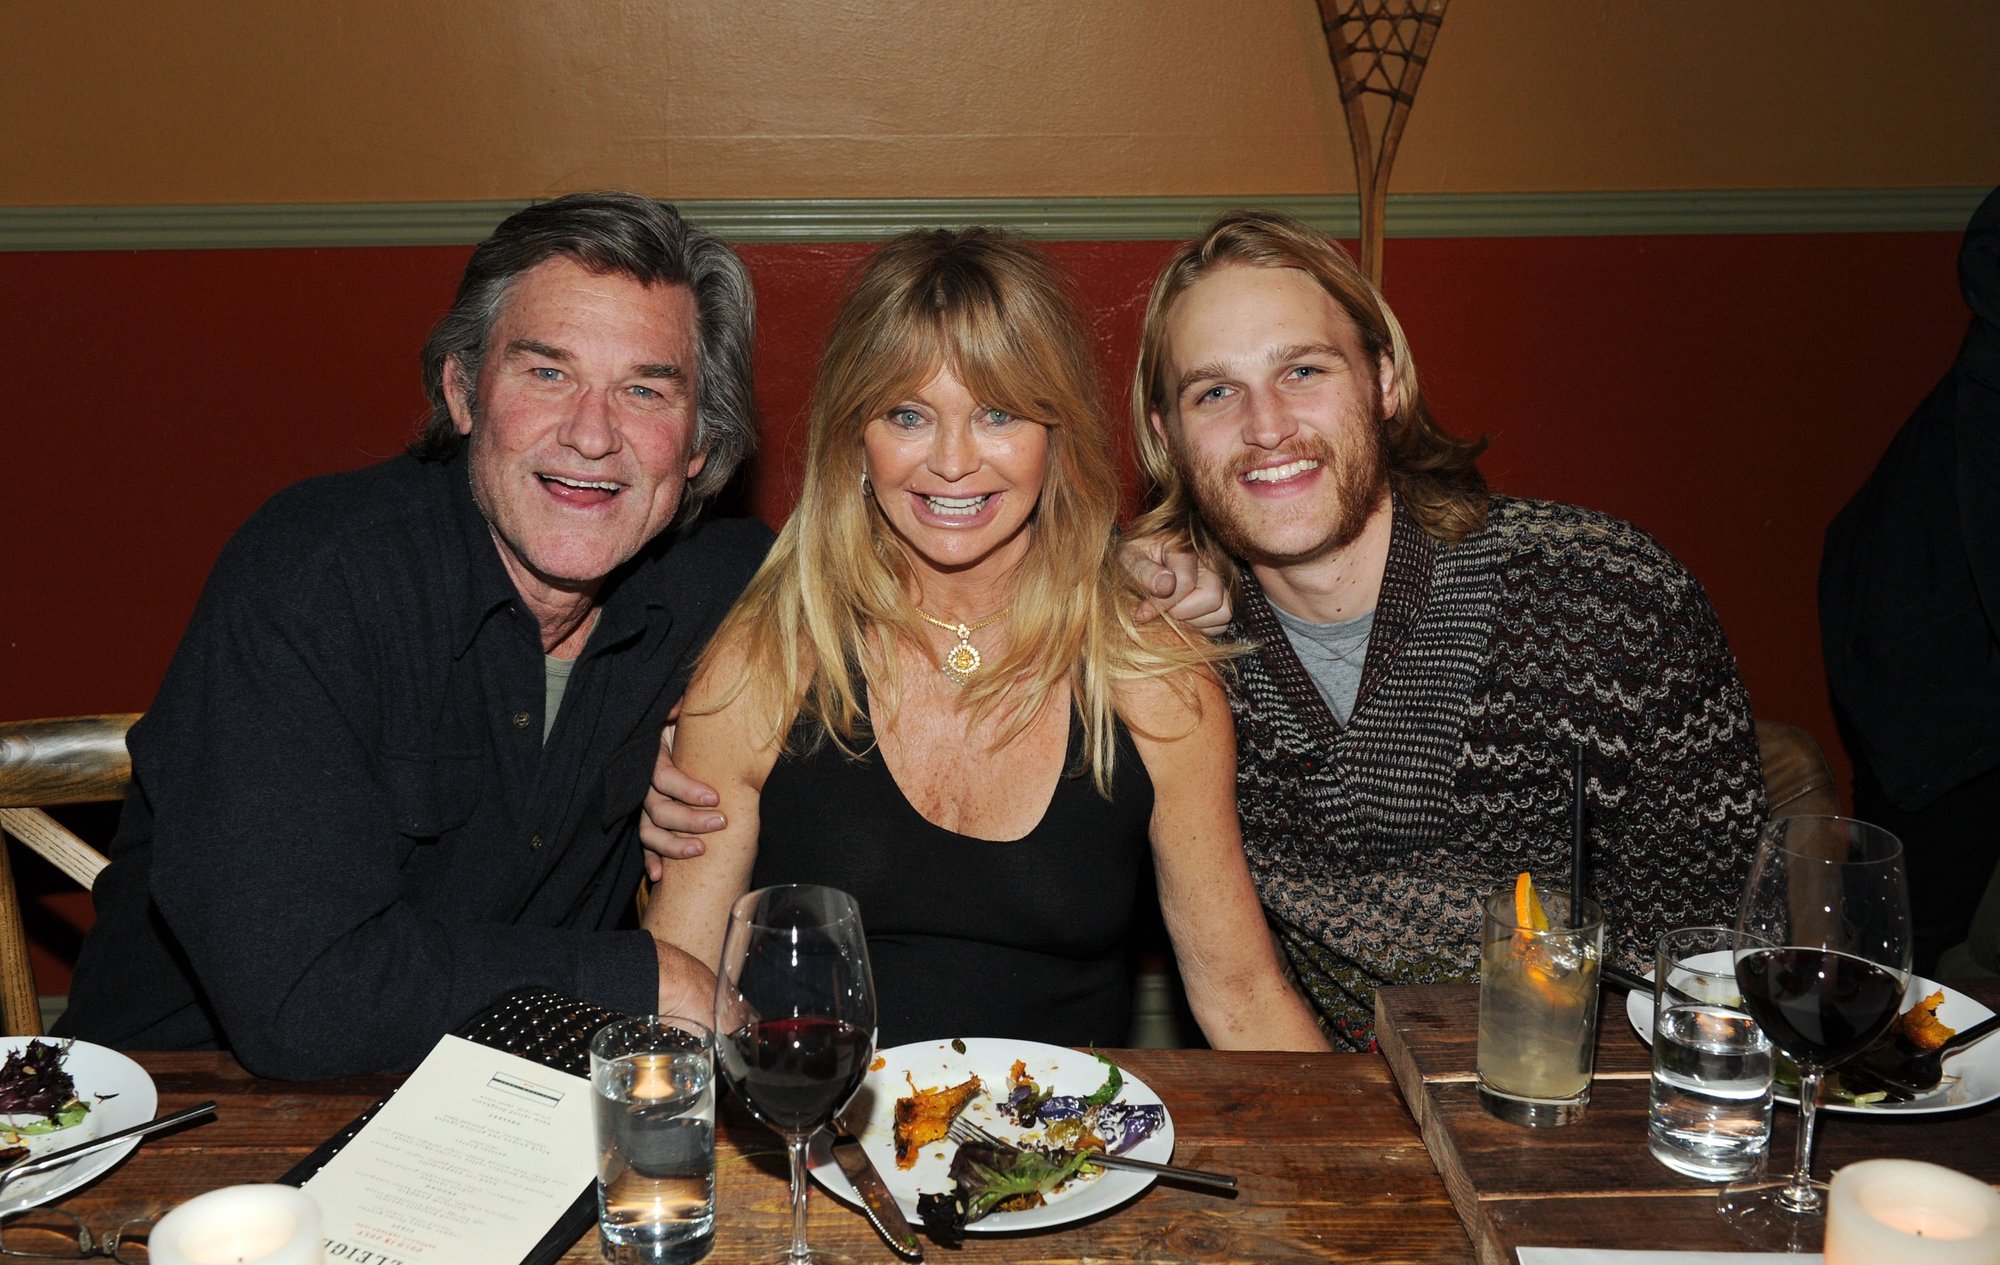 Goldie Hawn And Kurt Russell Son